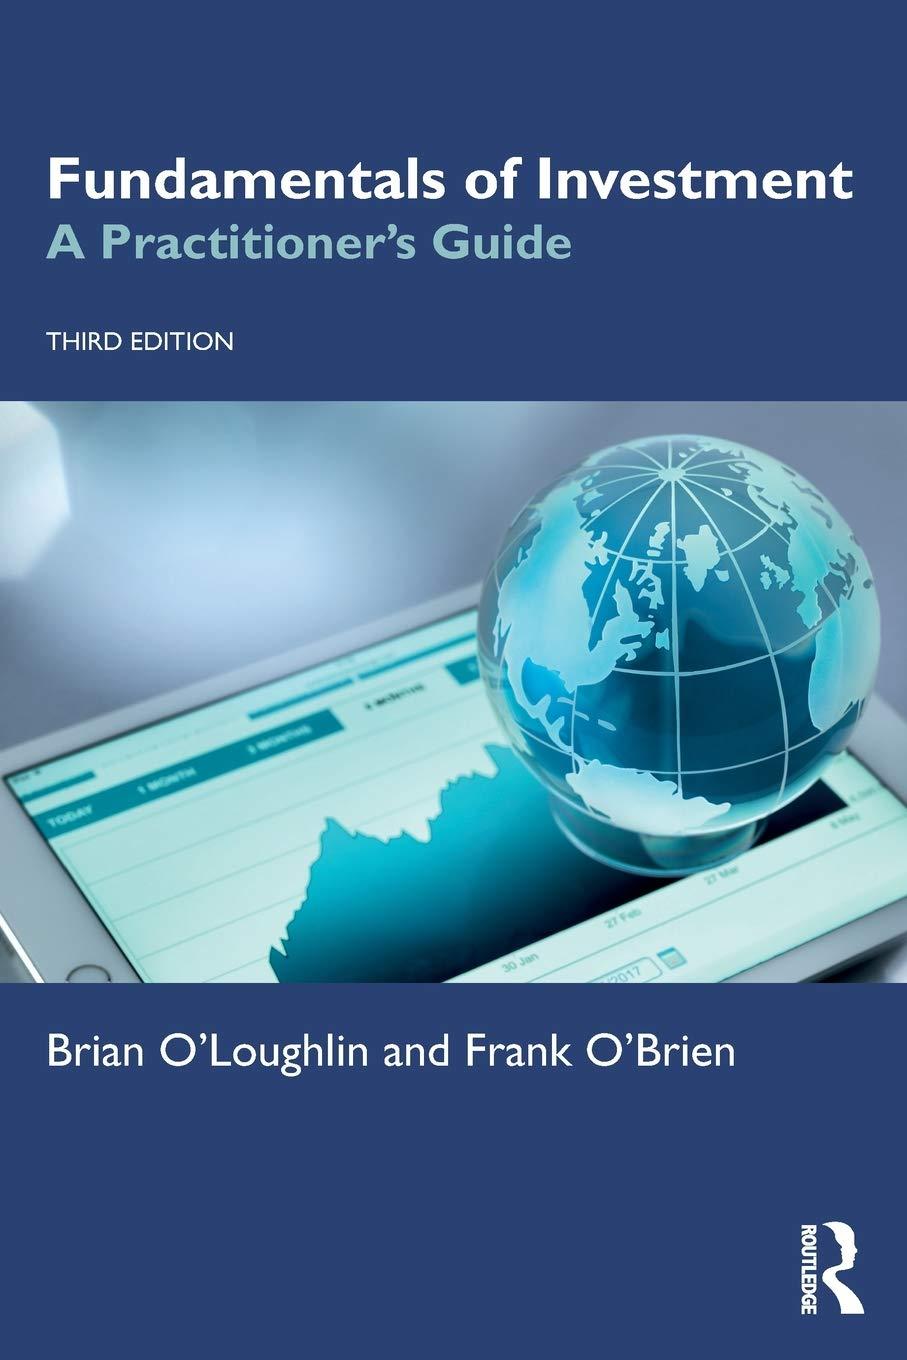 fundamentals of investment a practitioners guide 3rd edition brian o'loughlin, frank o'brien 113806162x,